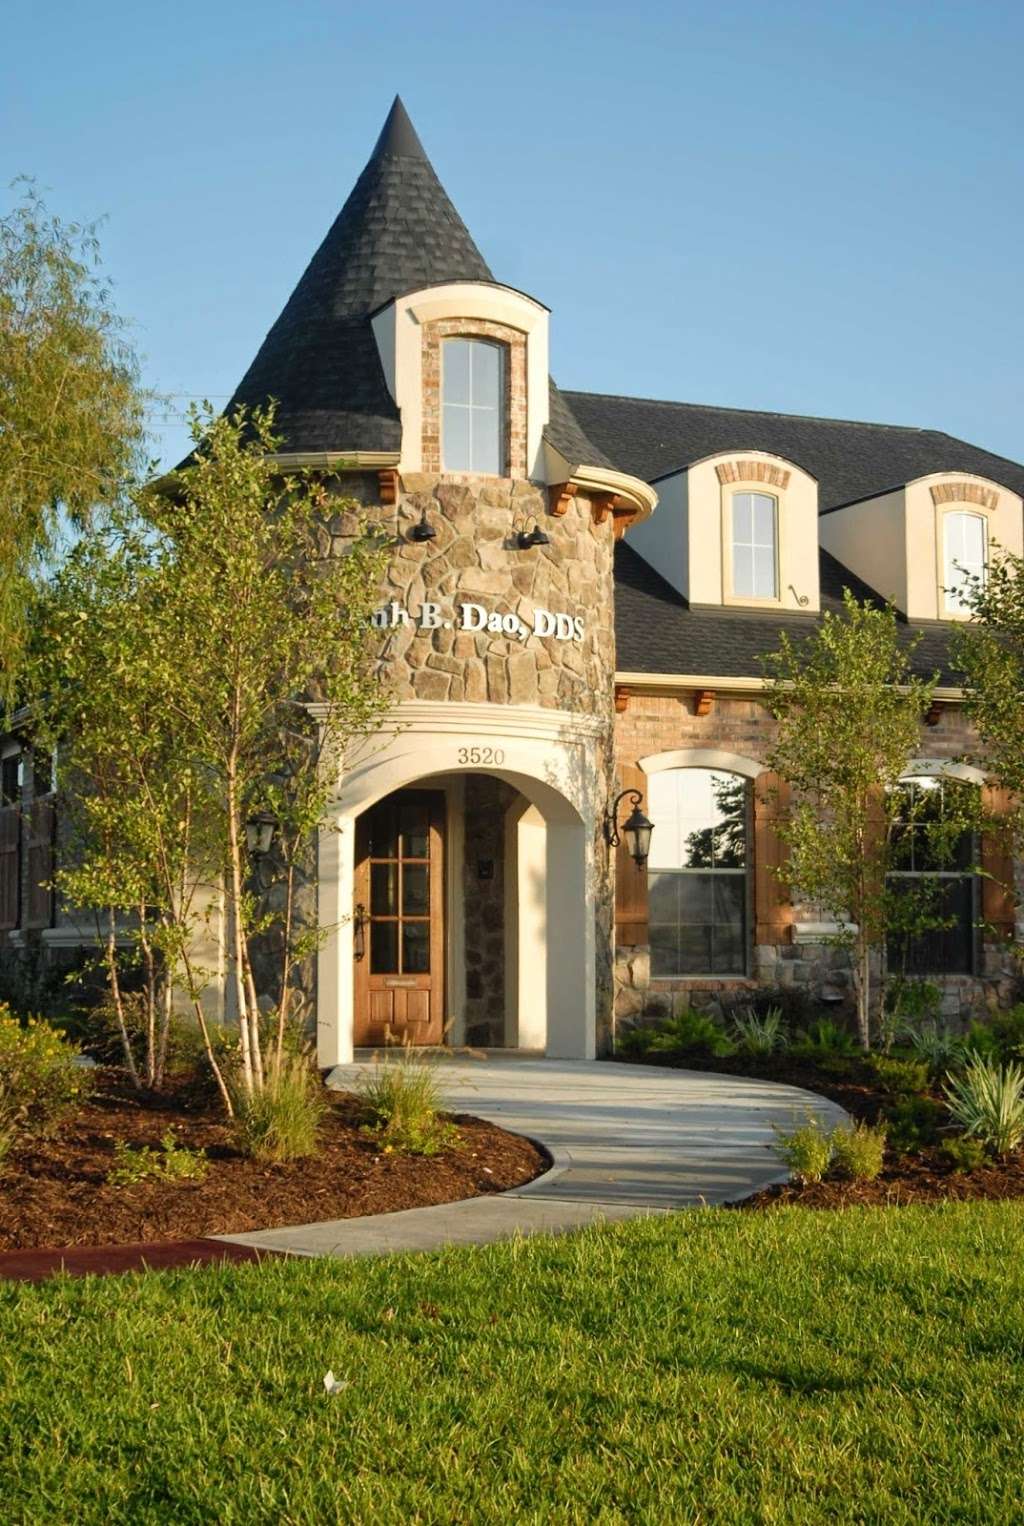 Dr. Anh B. Dao, Melody Lane Dental Group, PC | 3520 Sunset Meadows Dr, Pearland, TX 77581 | Phone: (281) 992-7000